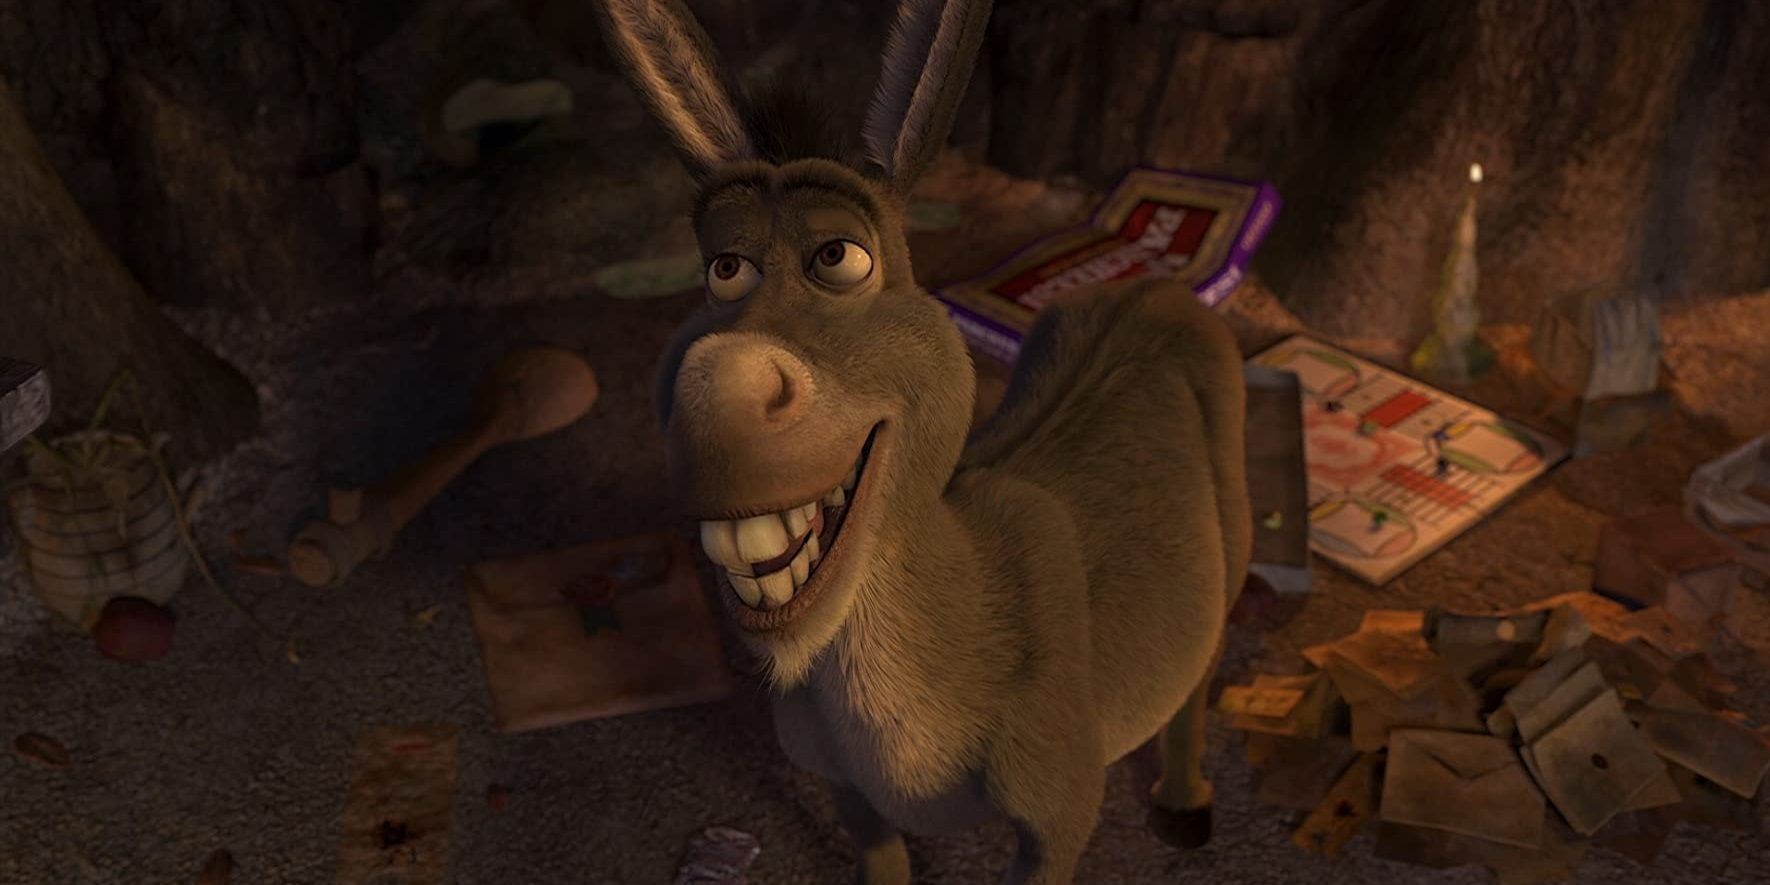 Ranking The Main Characters From Shrek By Intelligence.